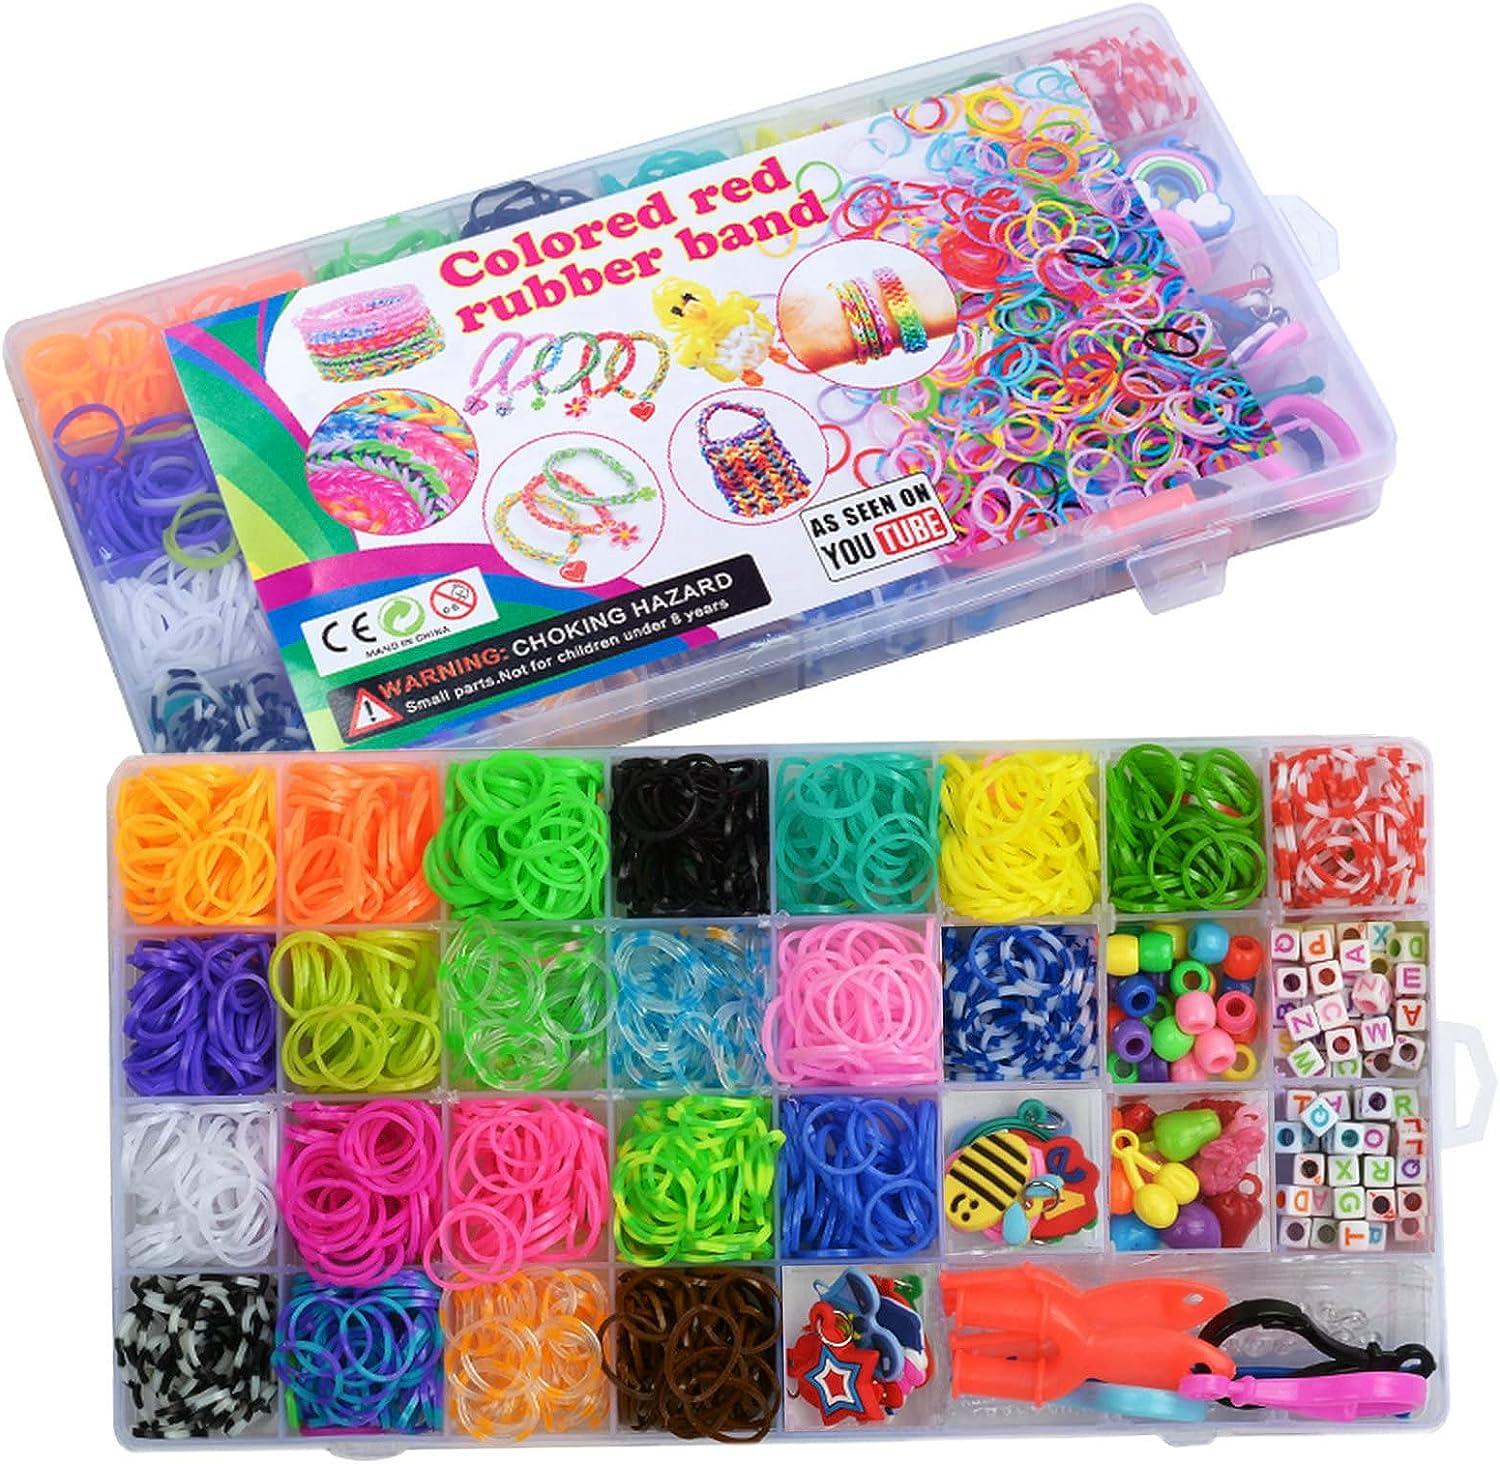 8 Mini Replacement Plastic Hooks. Loom Band Accessories 